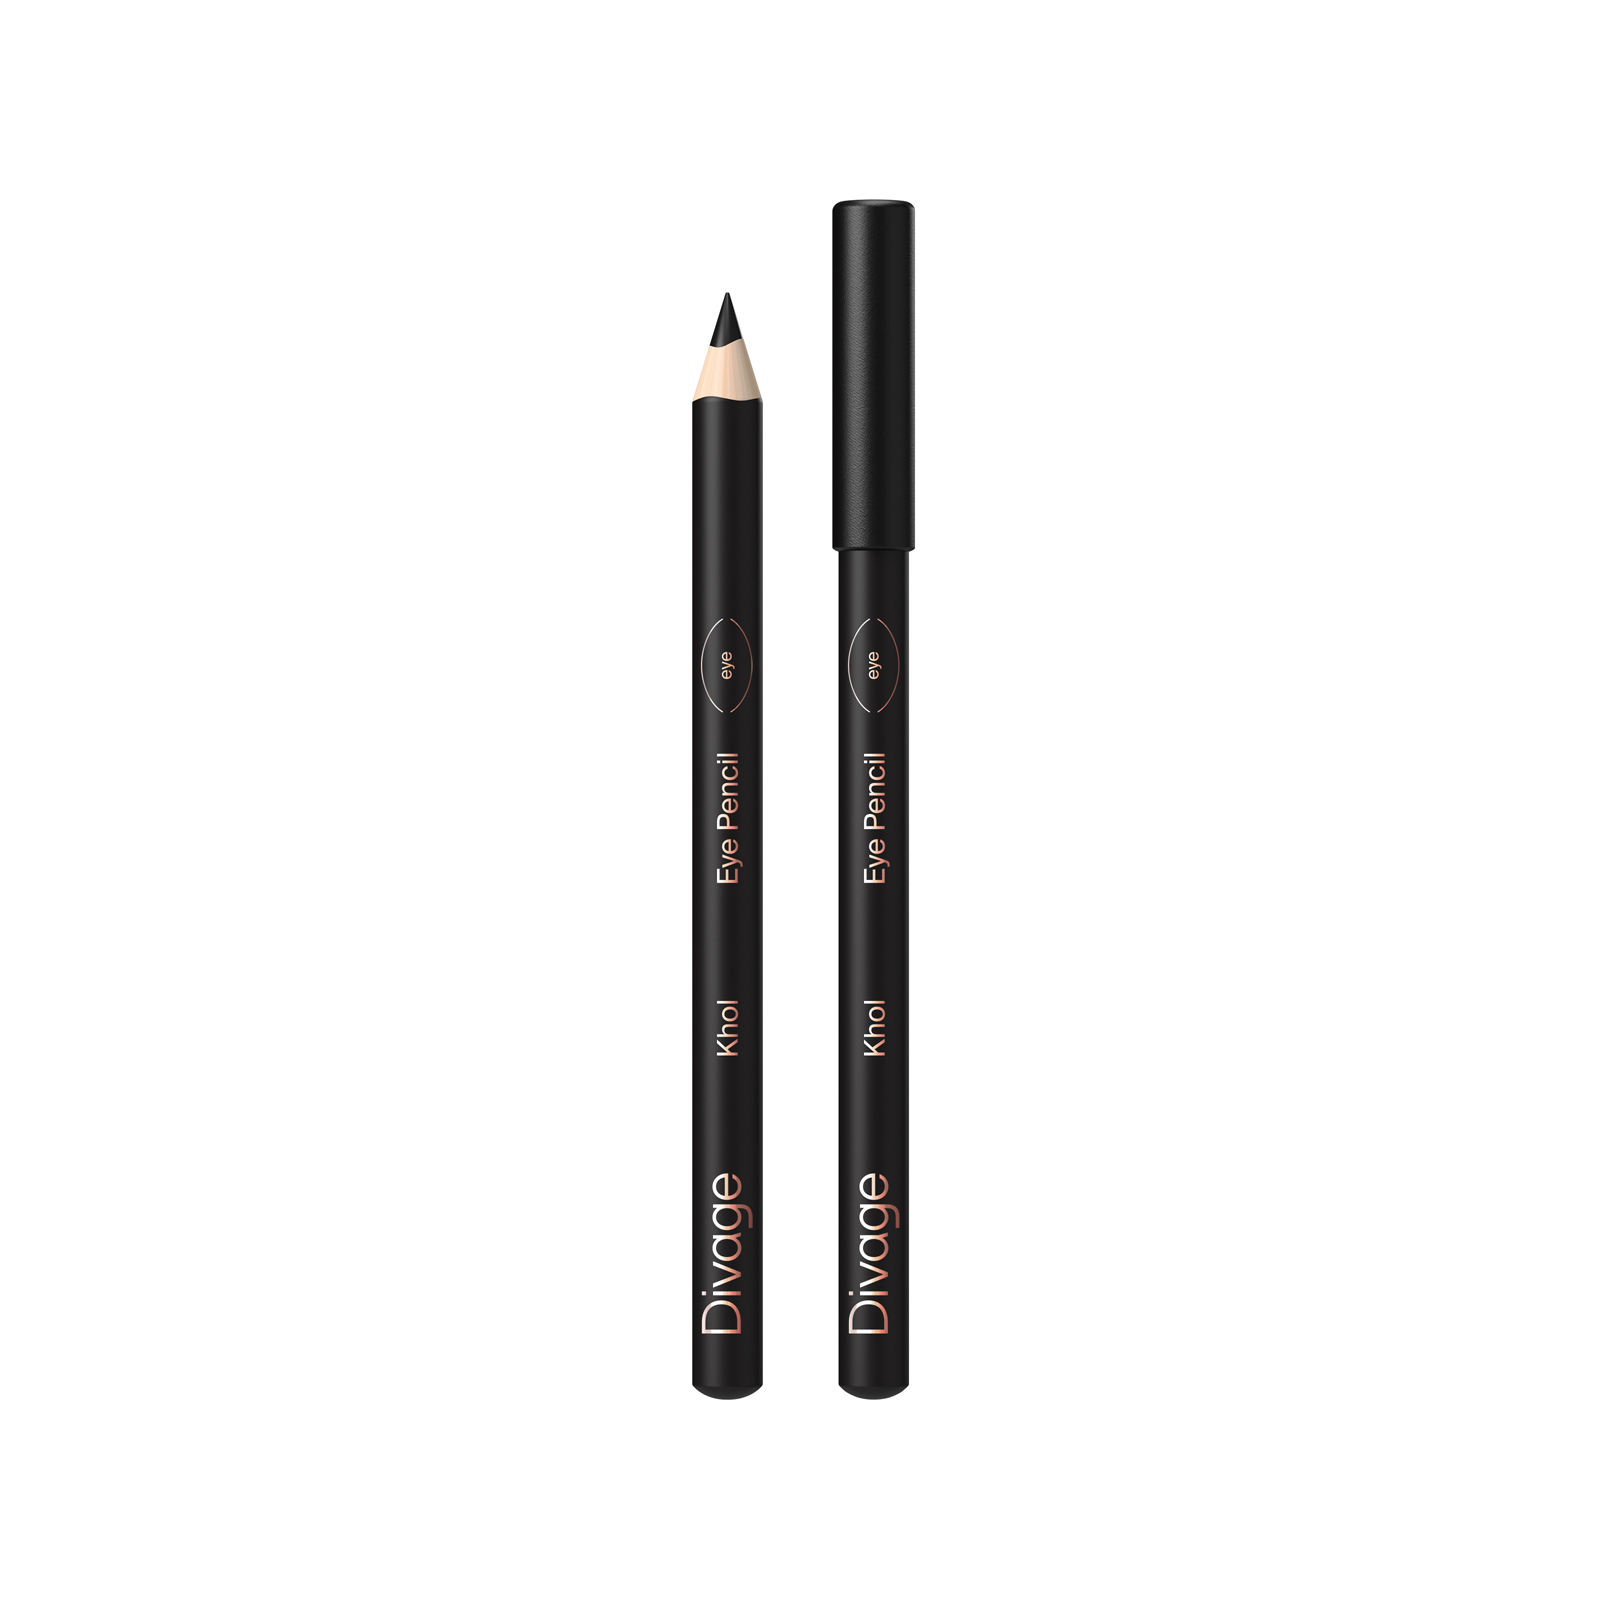 Карандаш для глаз Divage Khol Eye Pencil Black 4 г карандаш для глаз givenchy khol couture waterproof retractable 02 chestnut 0 3 г